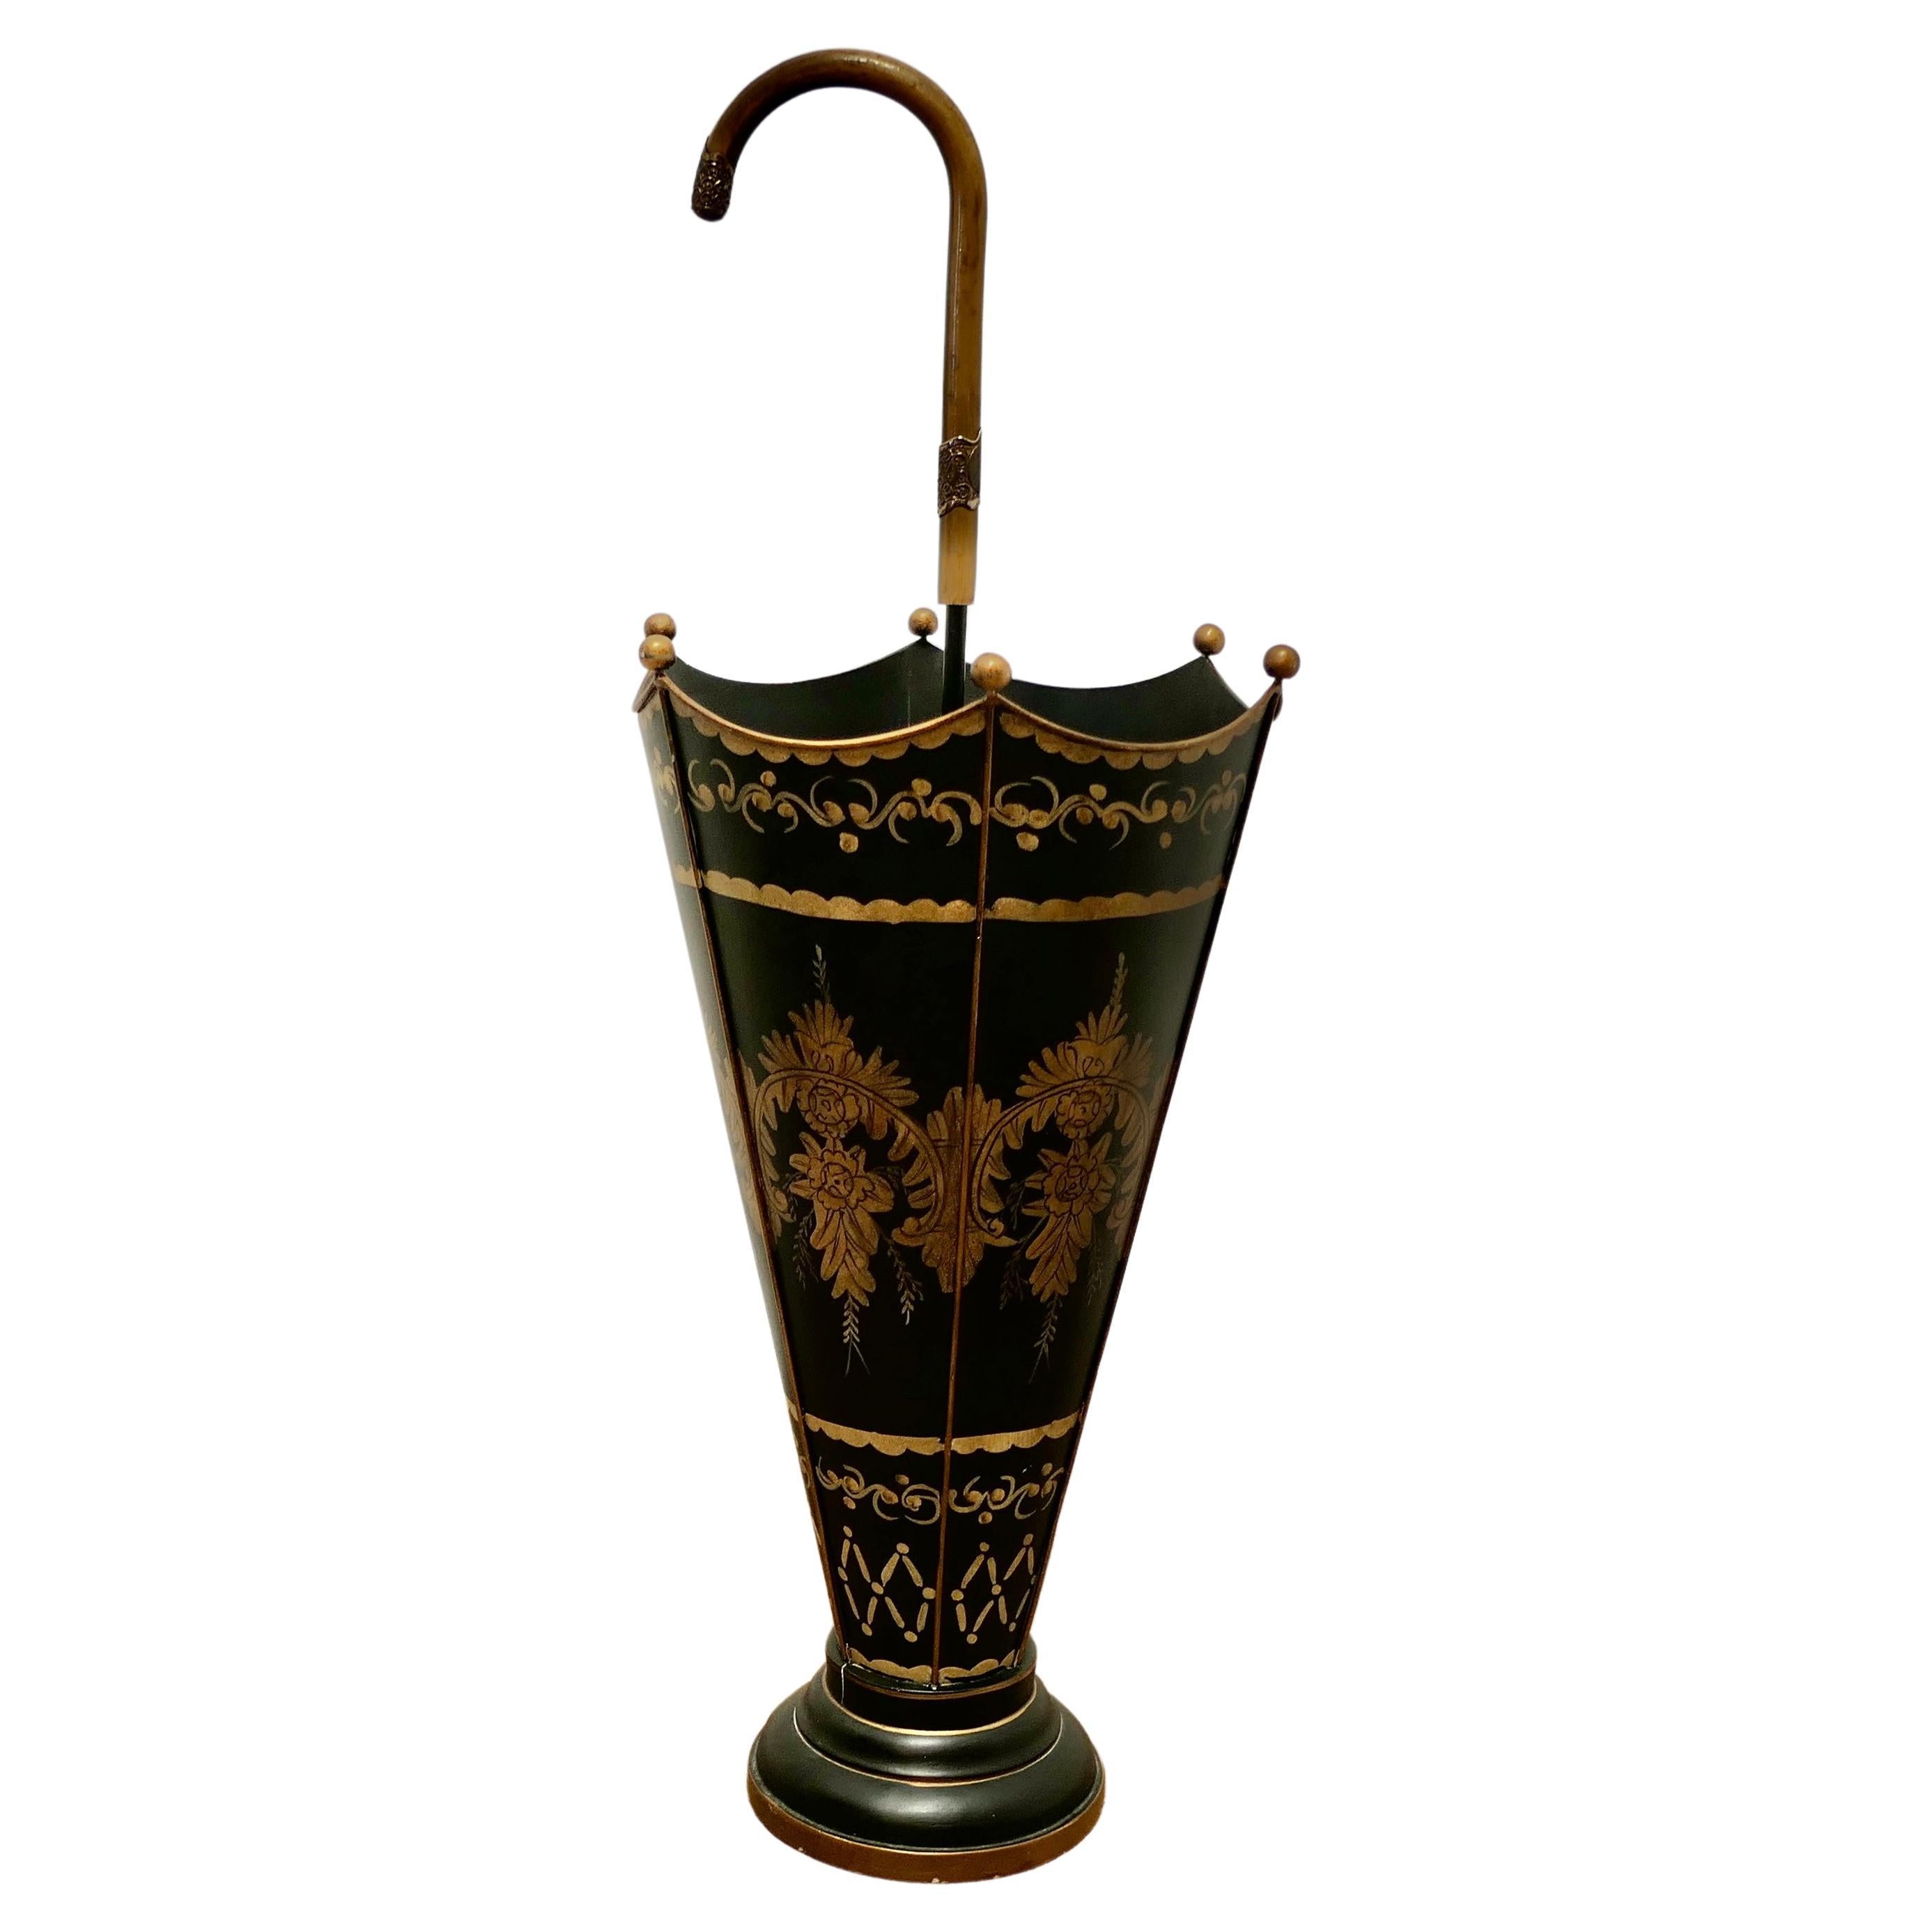 A Superb Italian Toleware Umbrella Stand, Hand Painted Gold on Black   